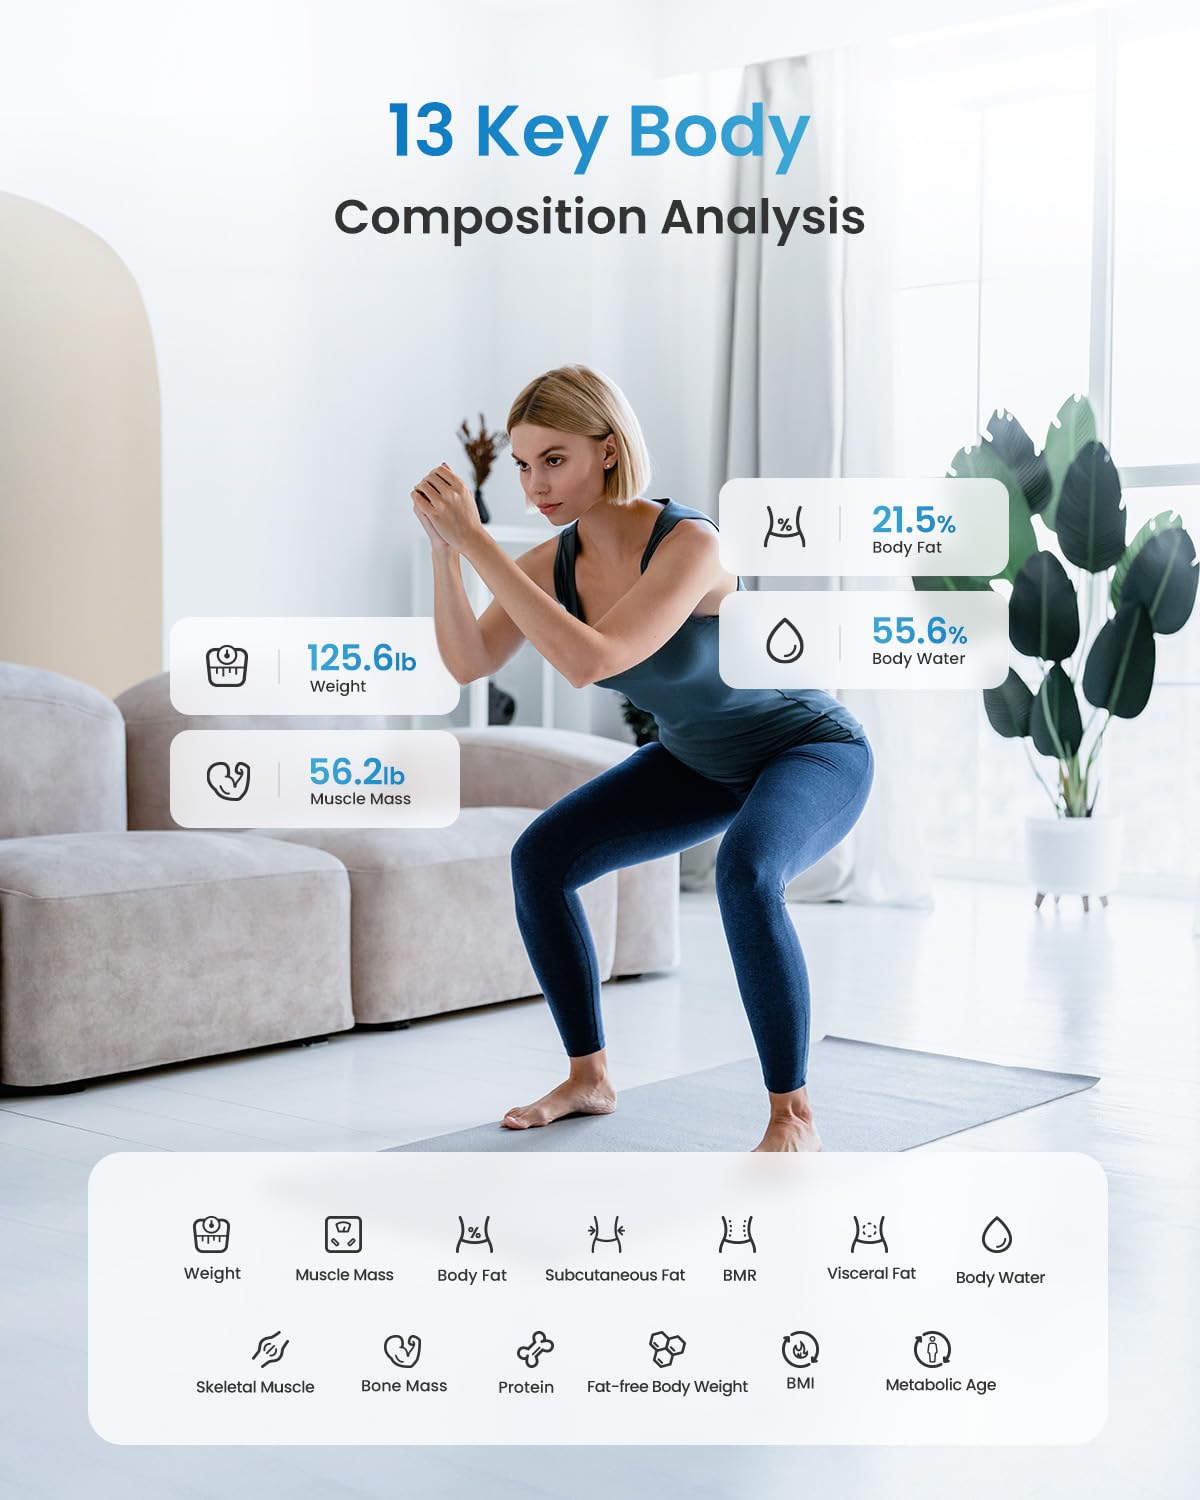 A woman in athletic wear performs a squat in a bright, modern living room, surrounded by graphics showing various health metrics like weight, muscle mass, and BMI using the Renpho Elis 1 Smart Body Scale.